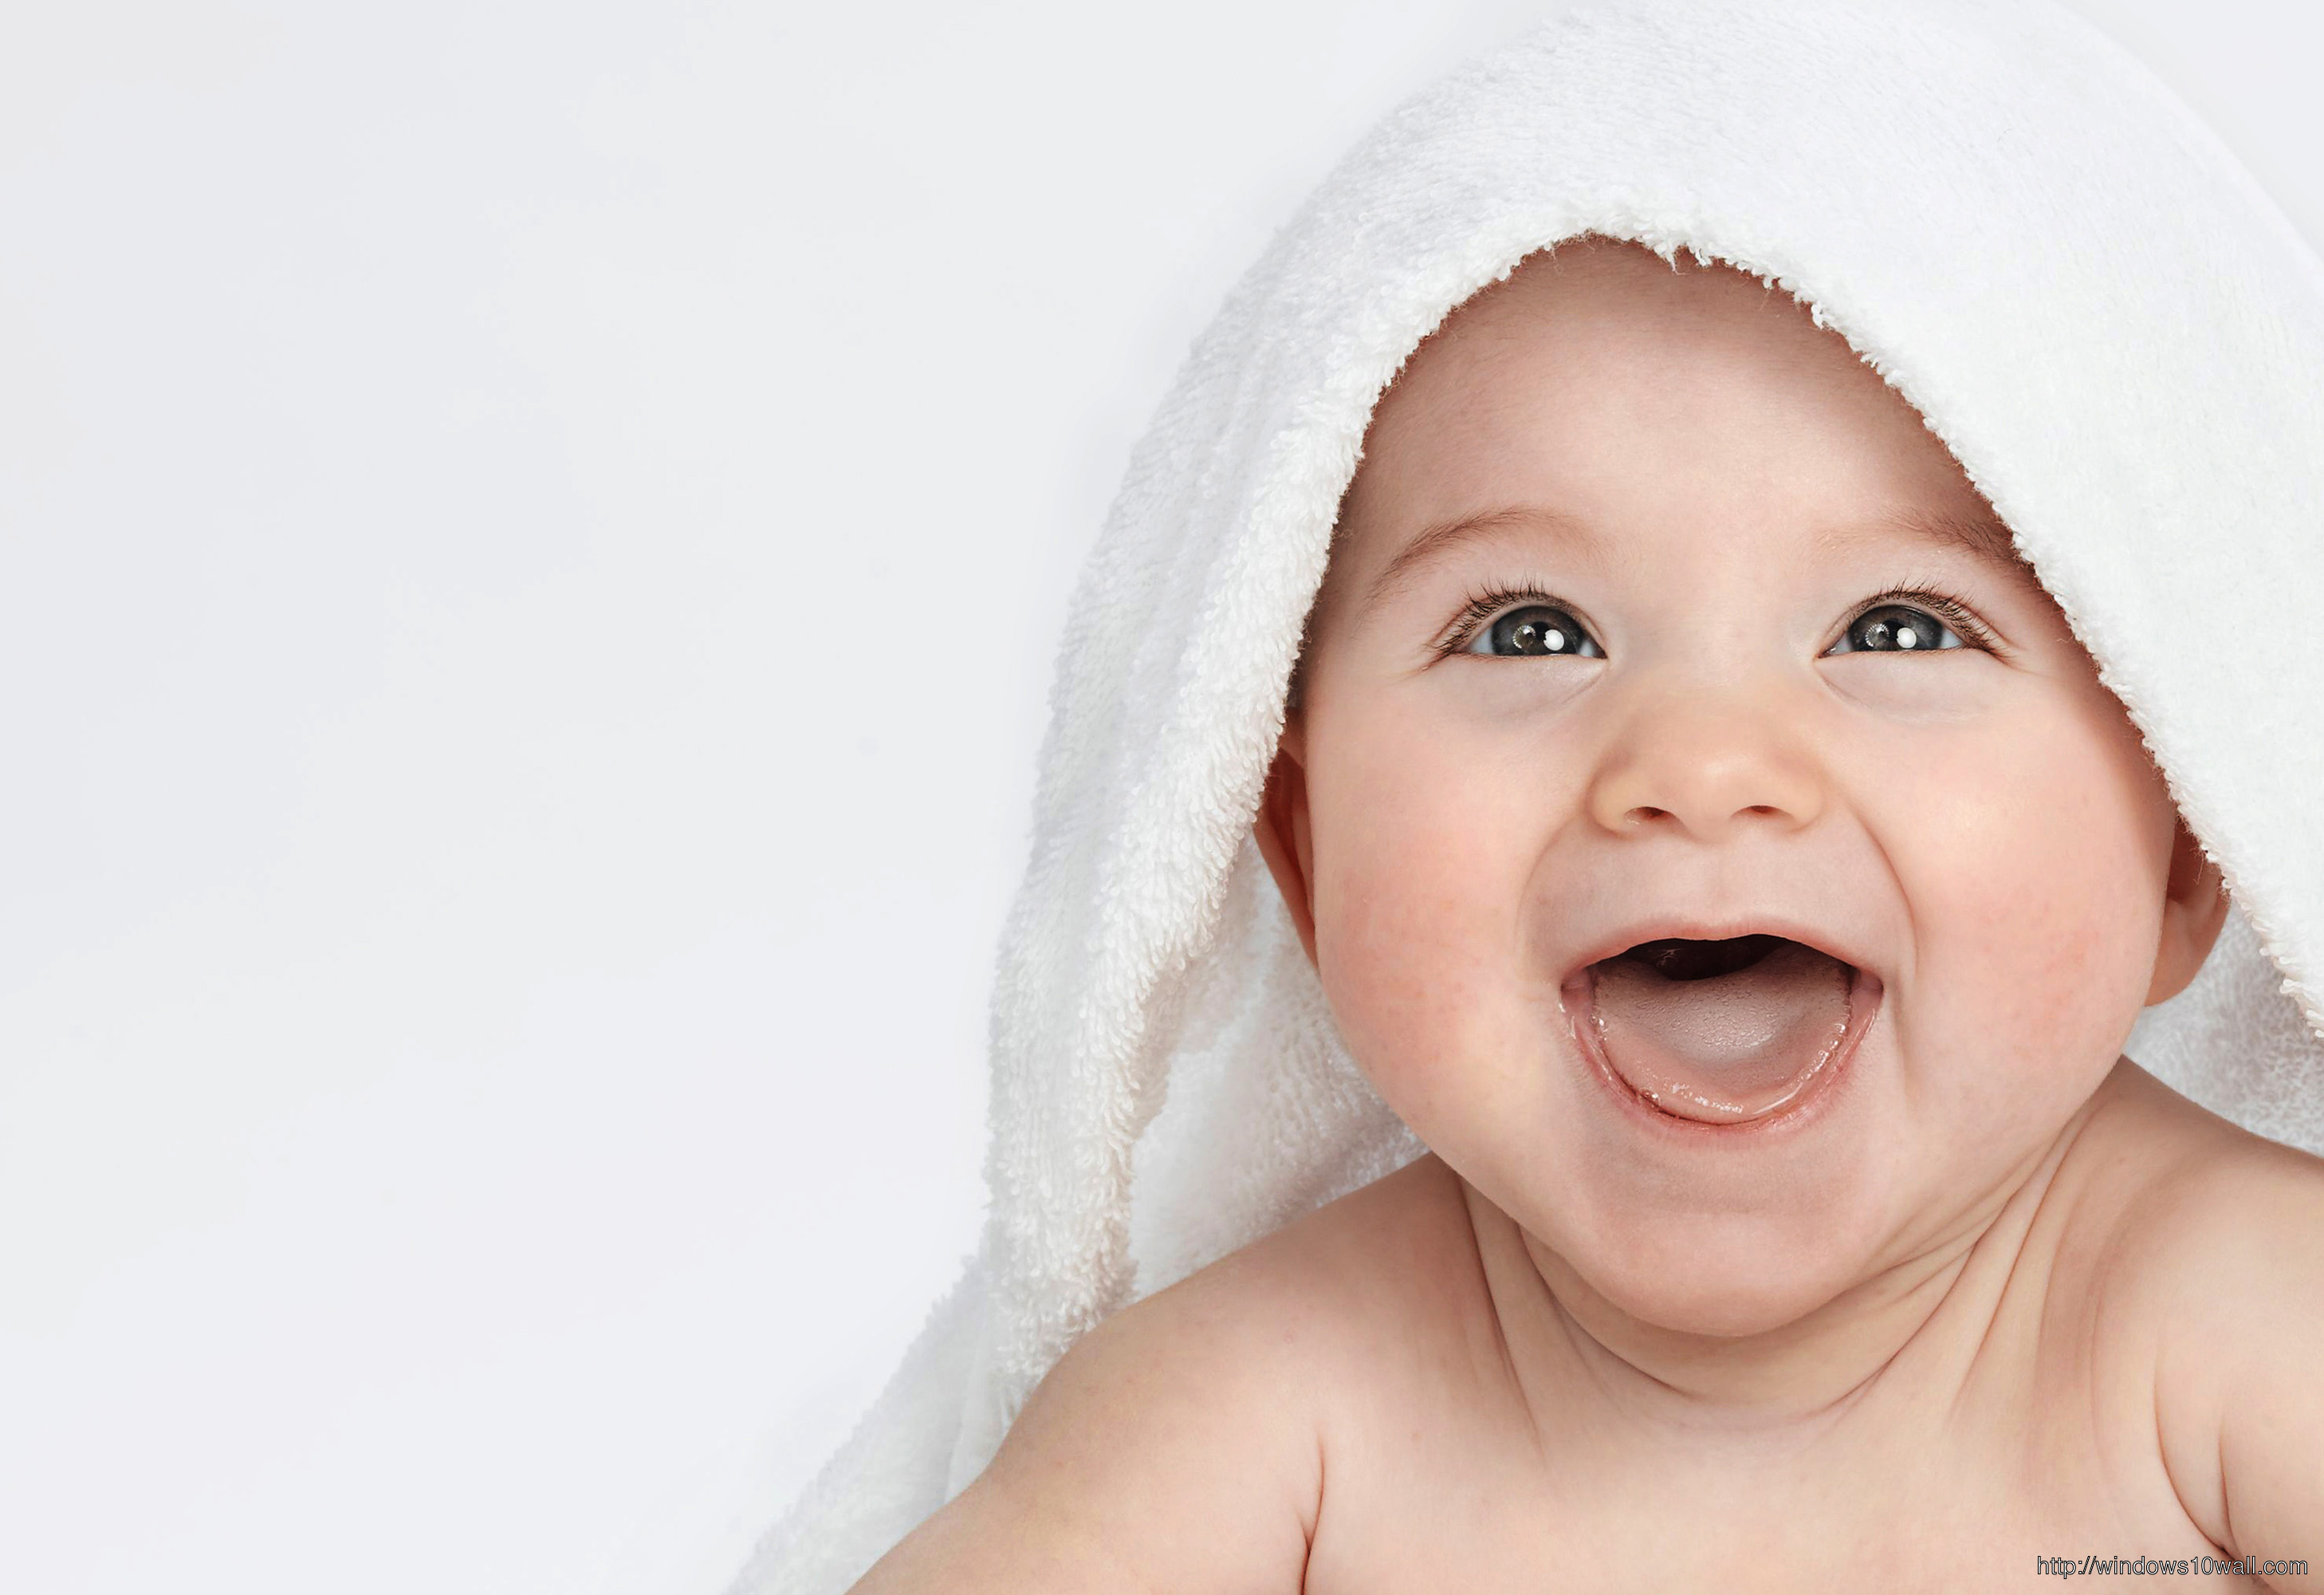 Laughing Baby White Background Wallpaper Windows 10 Wallpapers